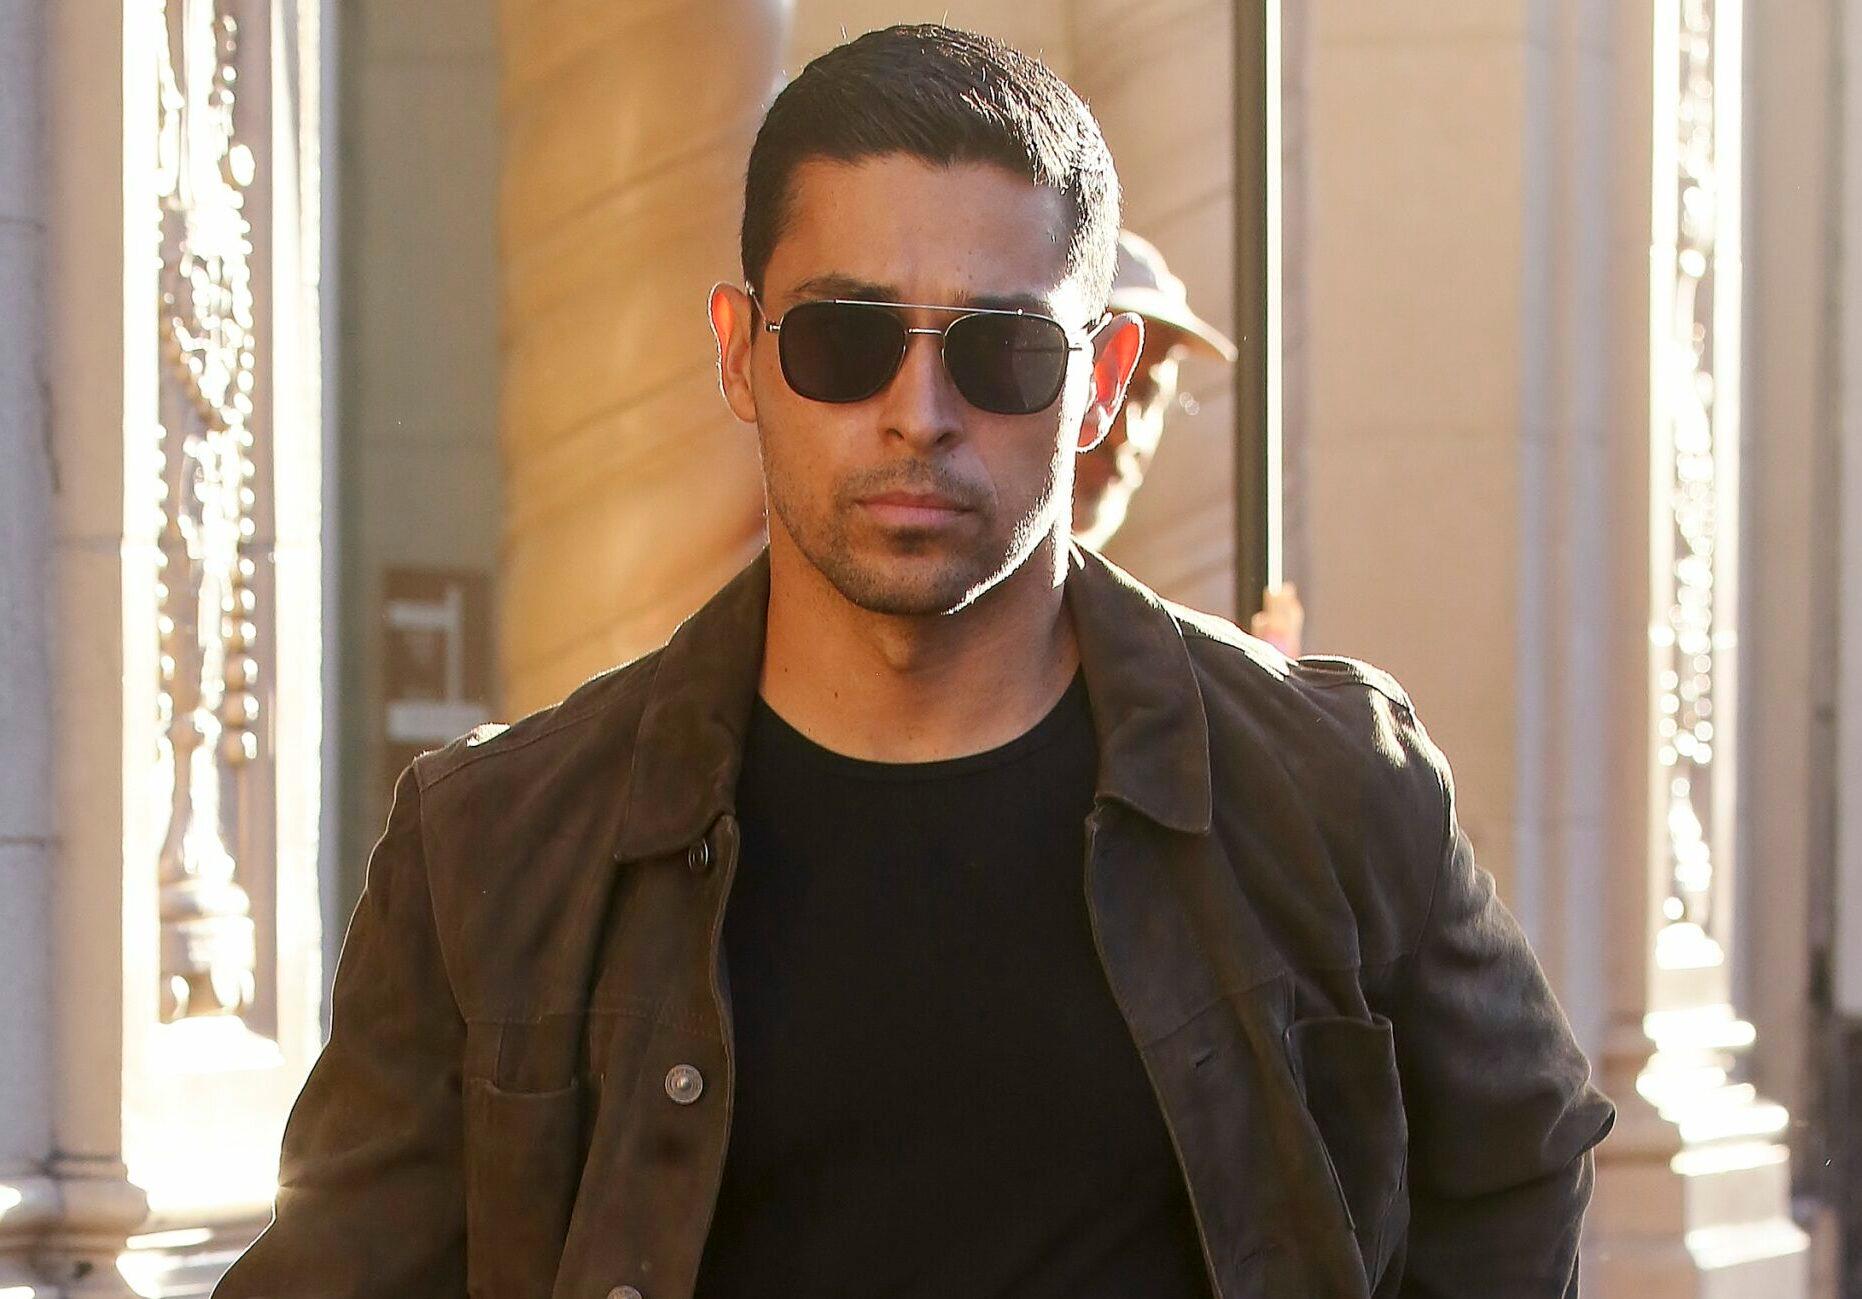 Wilmer Valderrama gives the peace sign while going to the "The Art Of Racing In The Rain" premiere